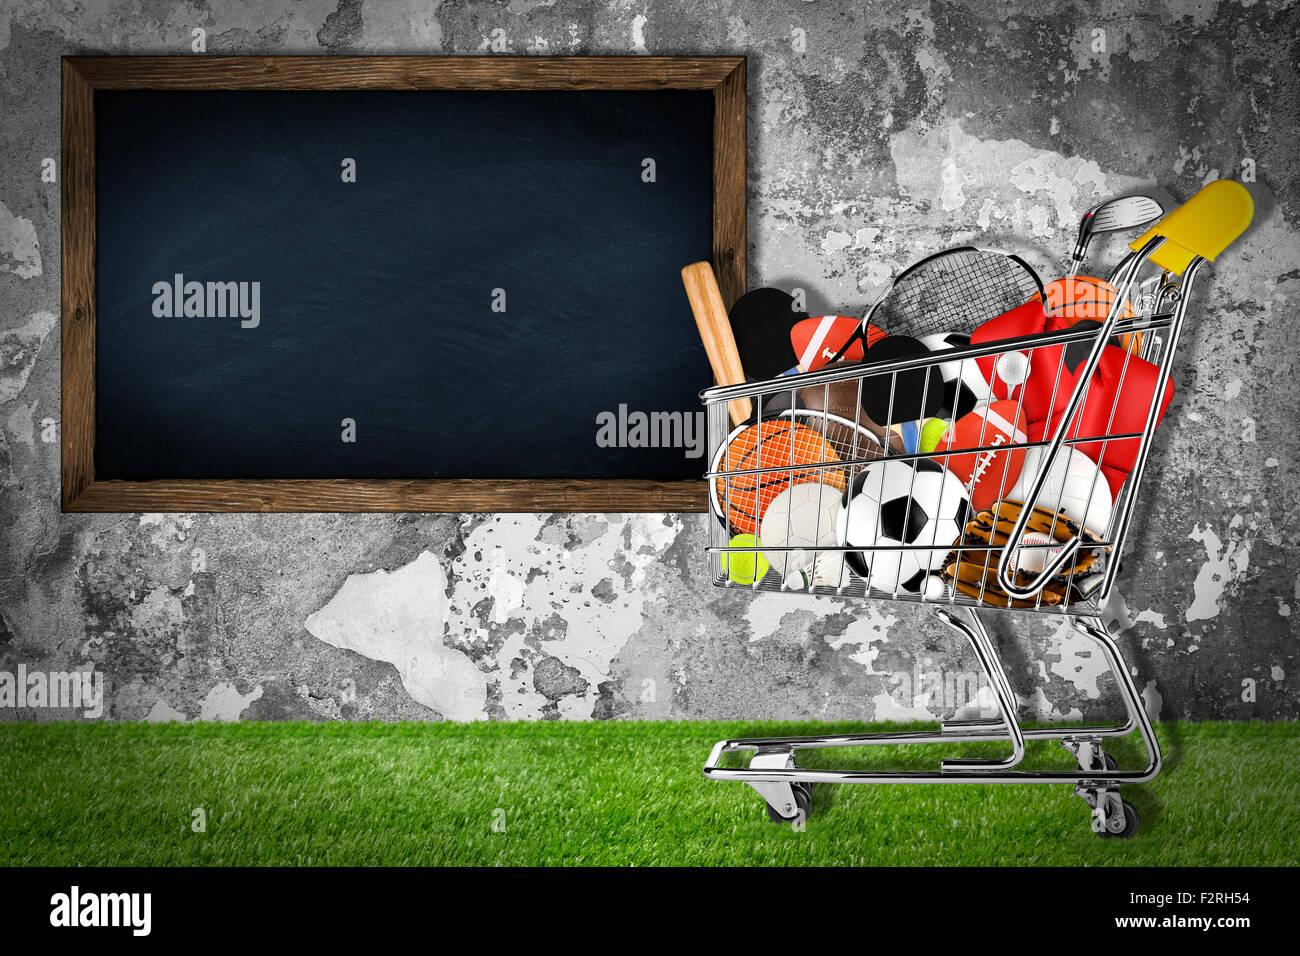 shopping cart filled with sports equipment in front of stone wall with blackboard Stock Photo